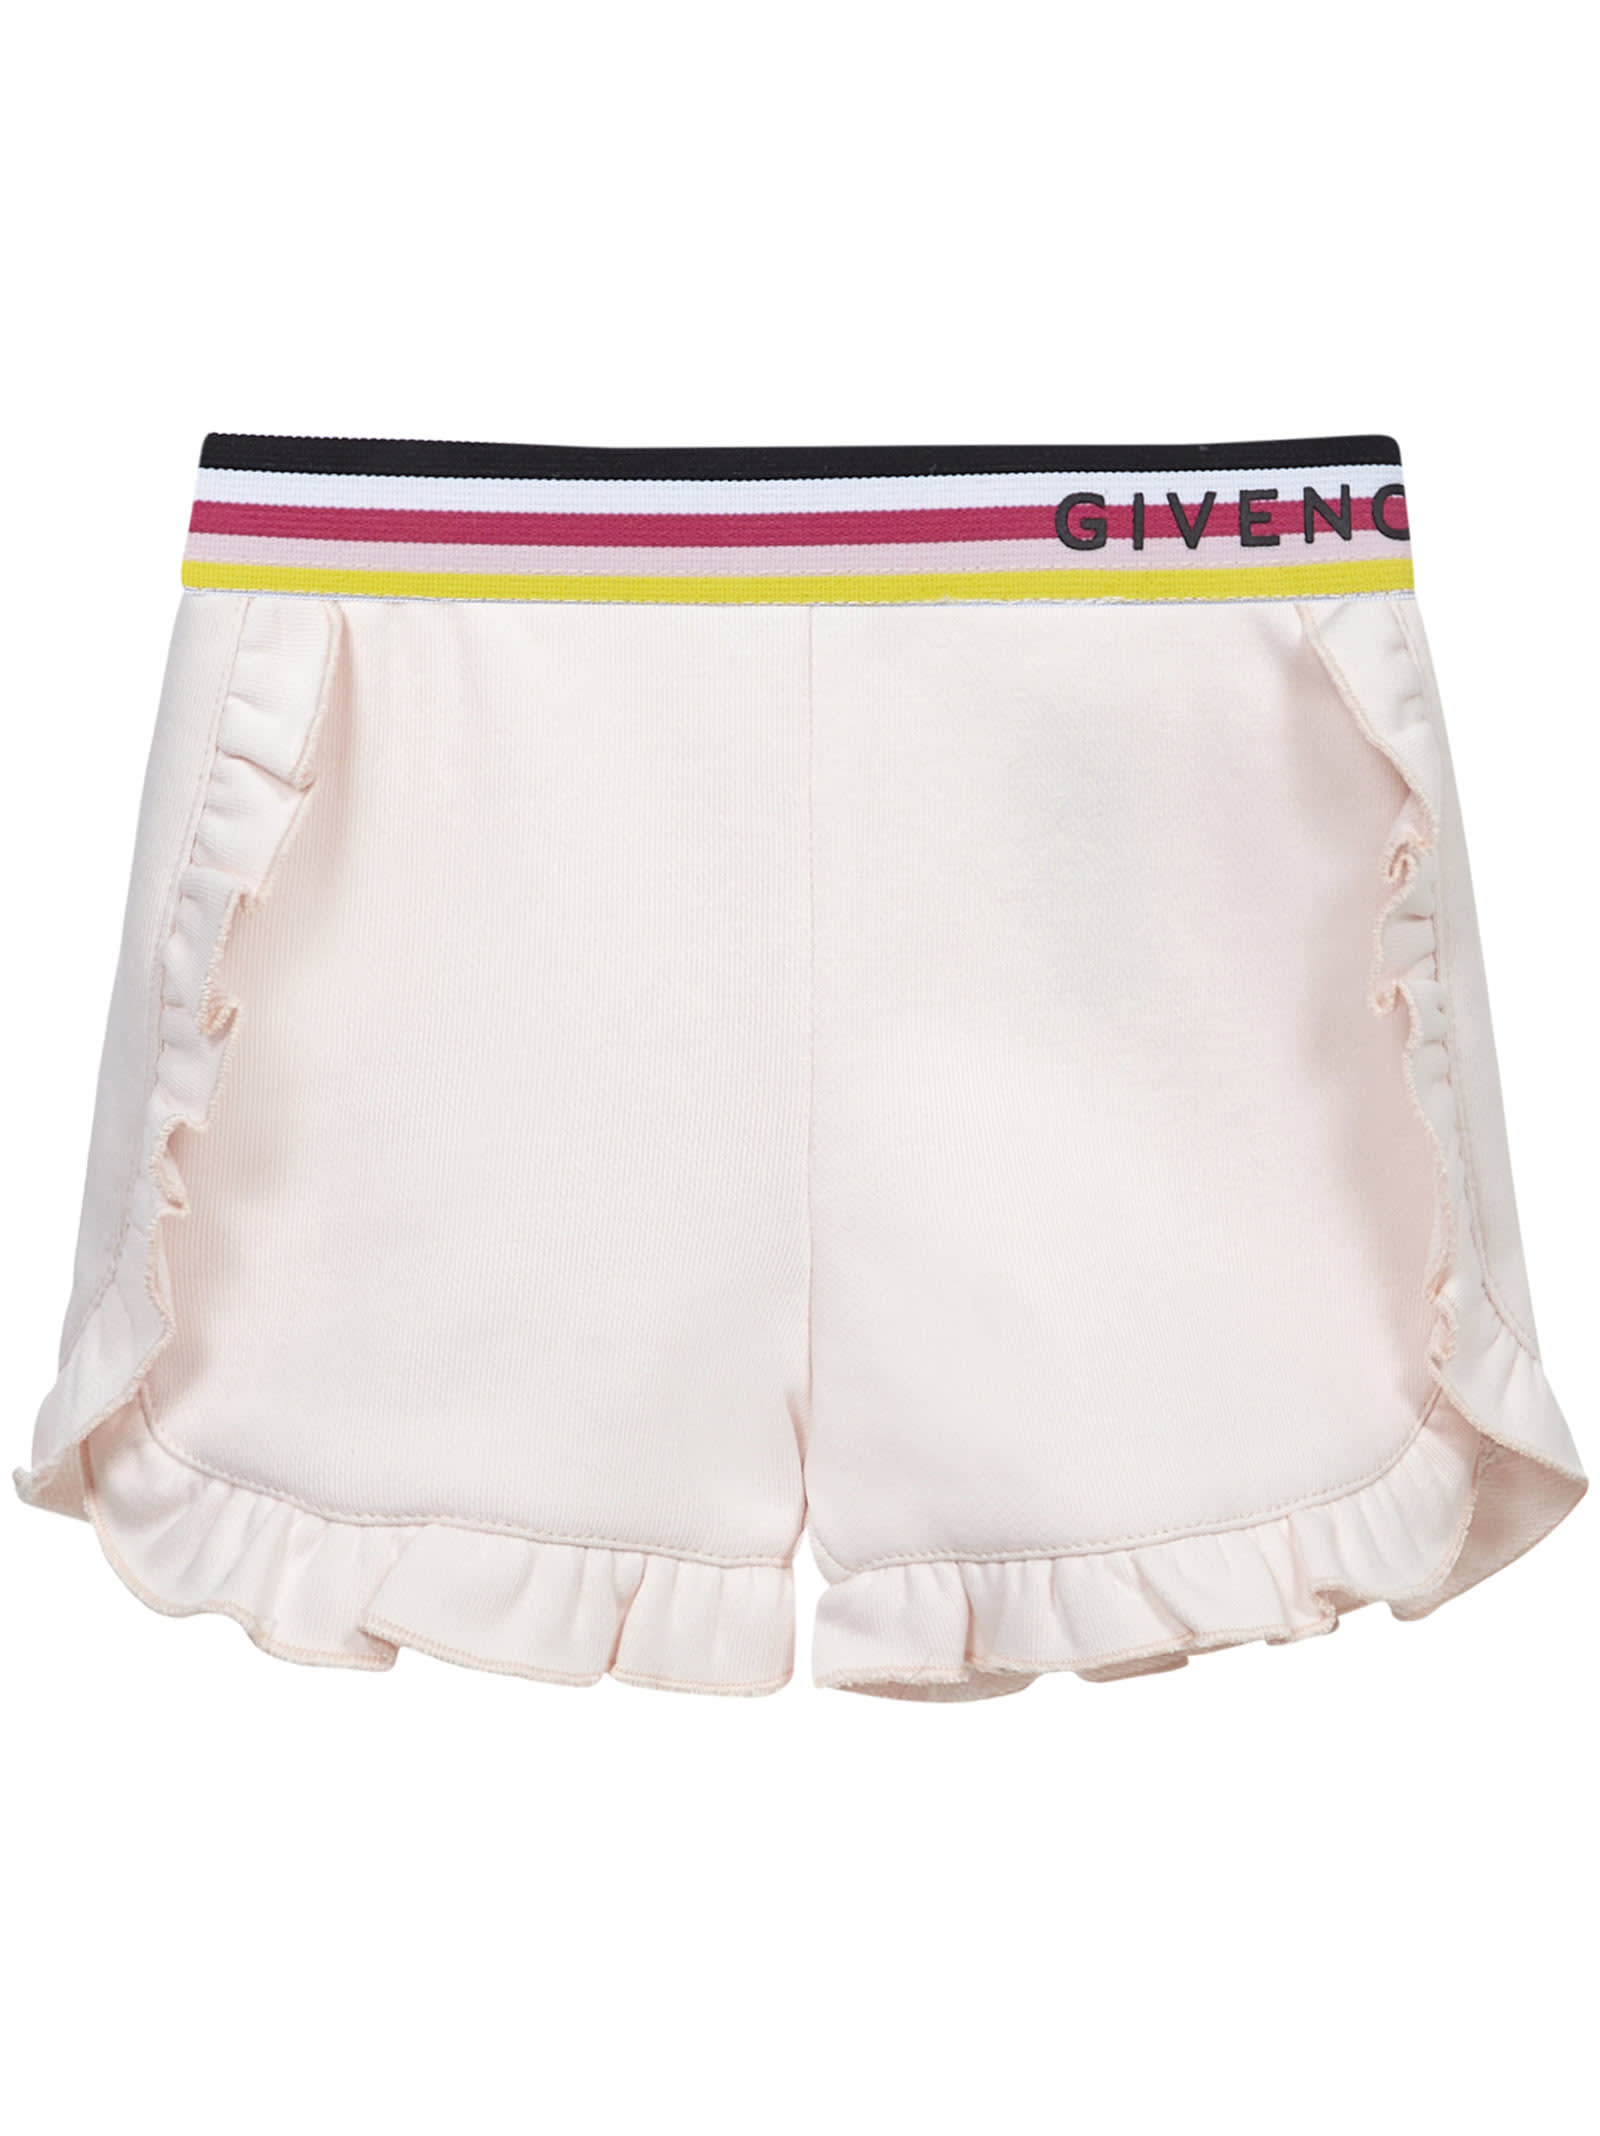 Givenchy Kids Shorts In Pink